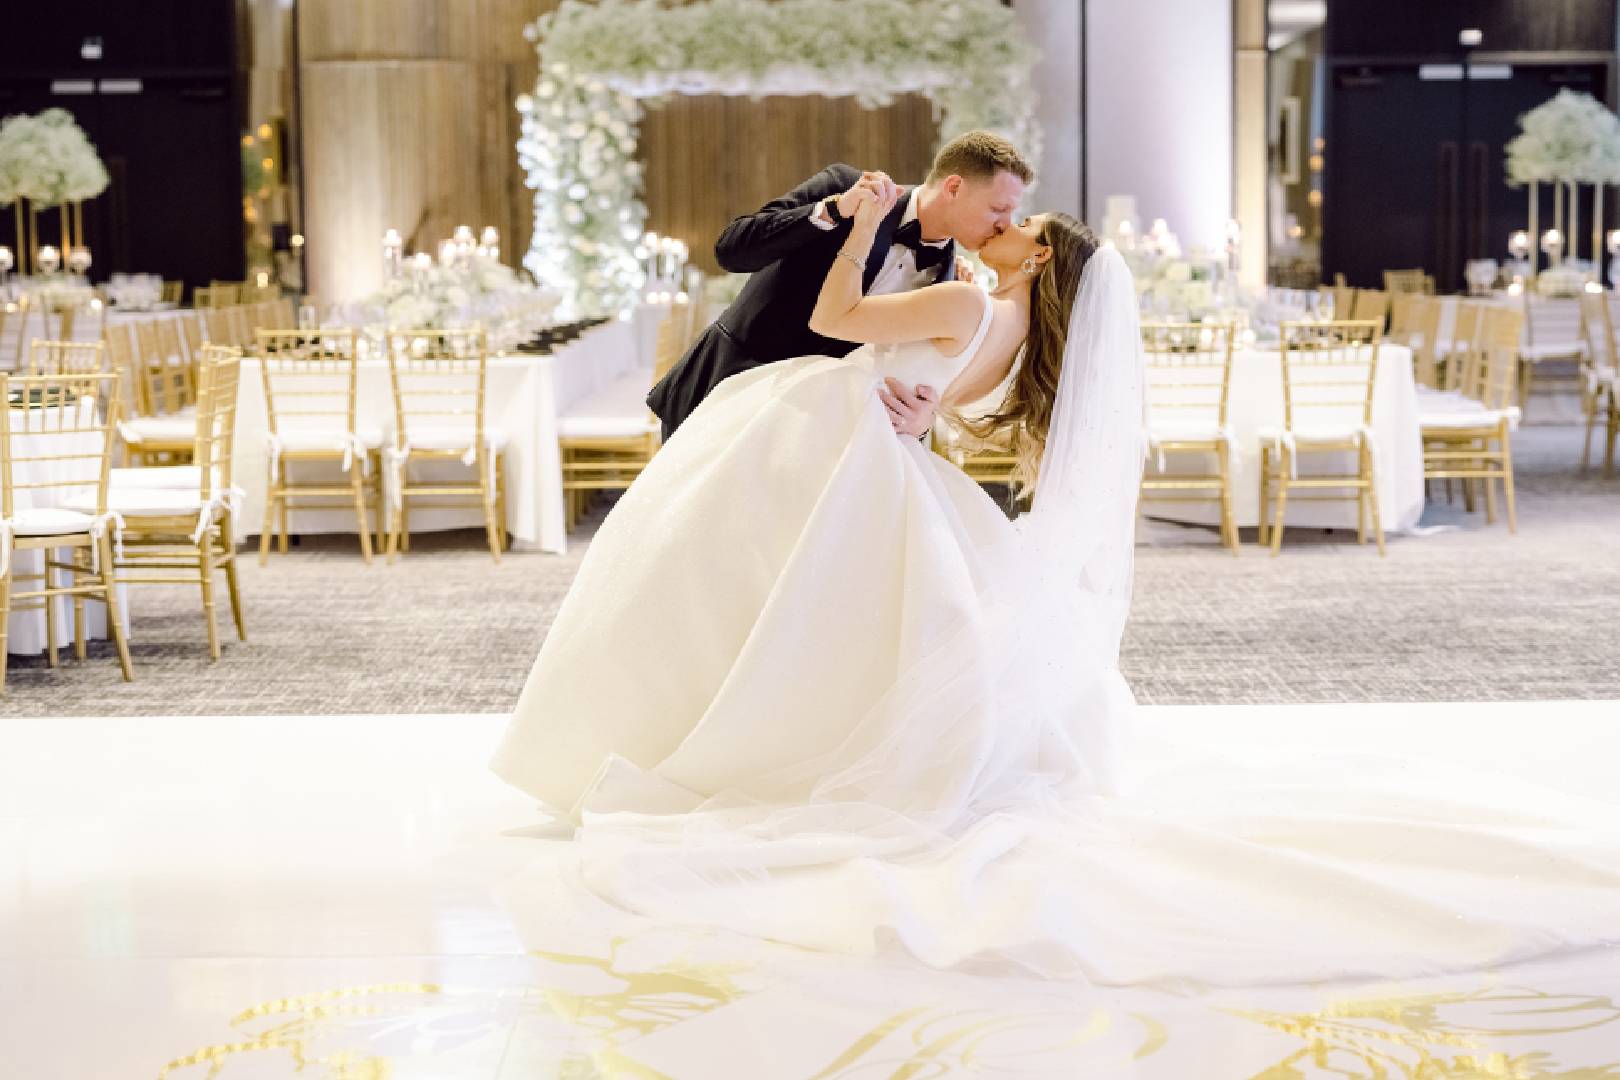 A bride and groom share a kiss in a lavishly decorated ballroom with elegant chairs and floral arrangements in the background.